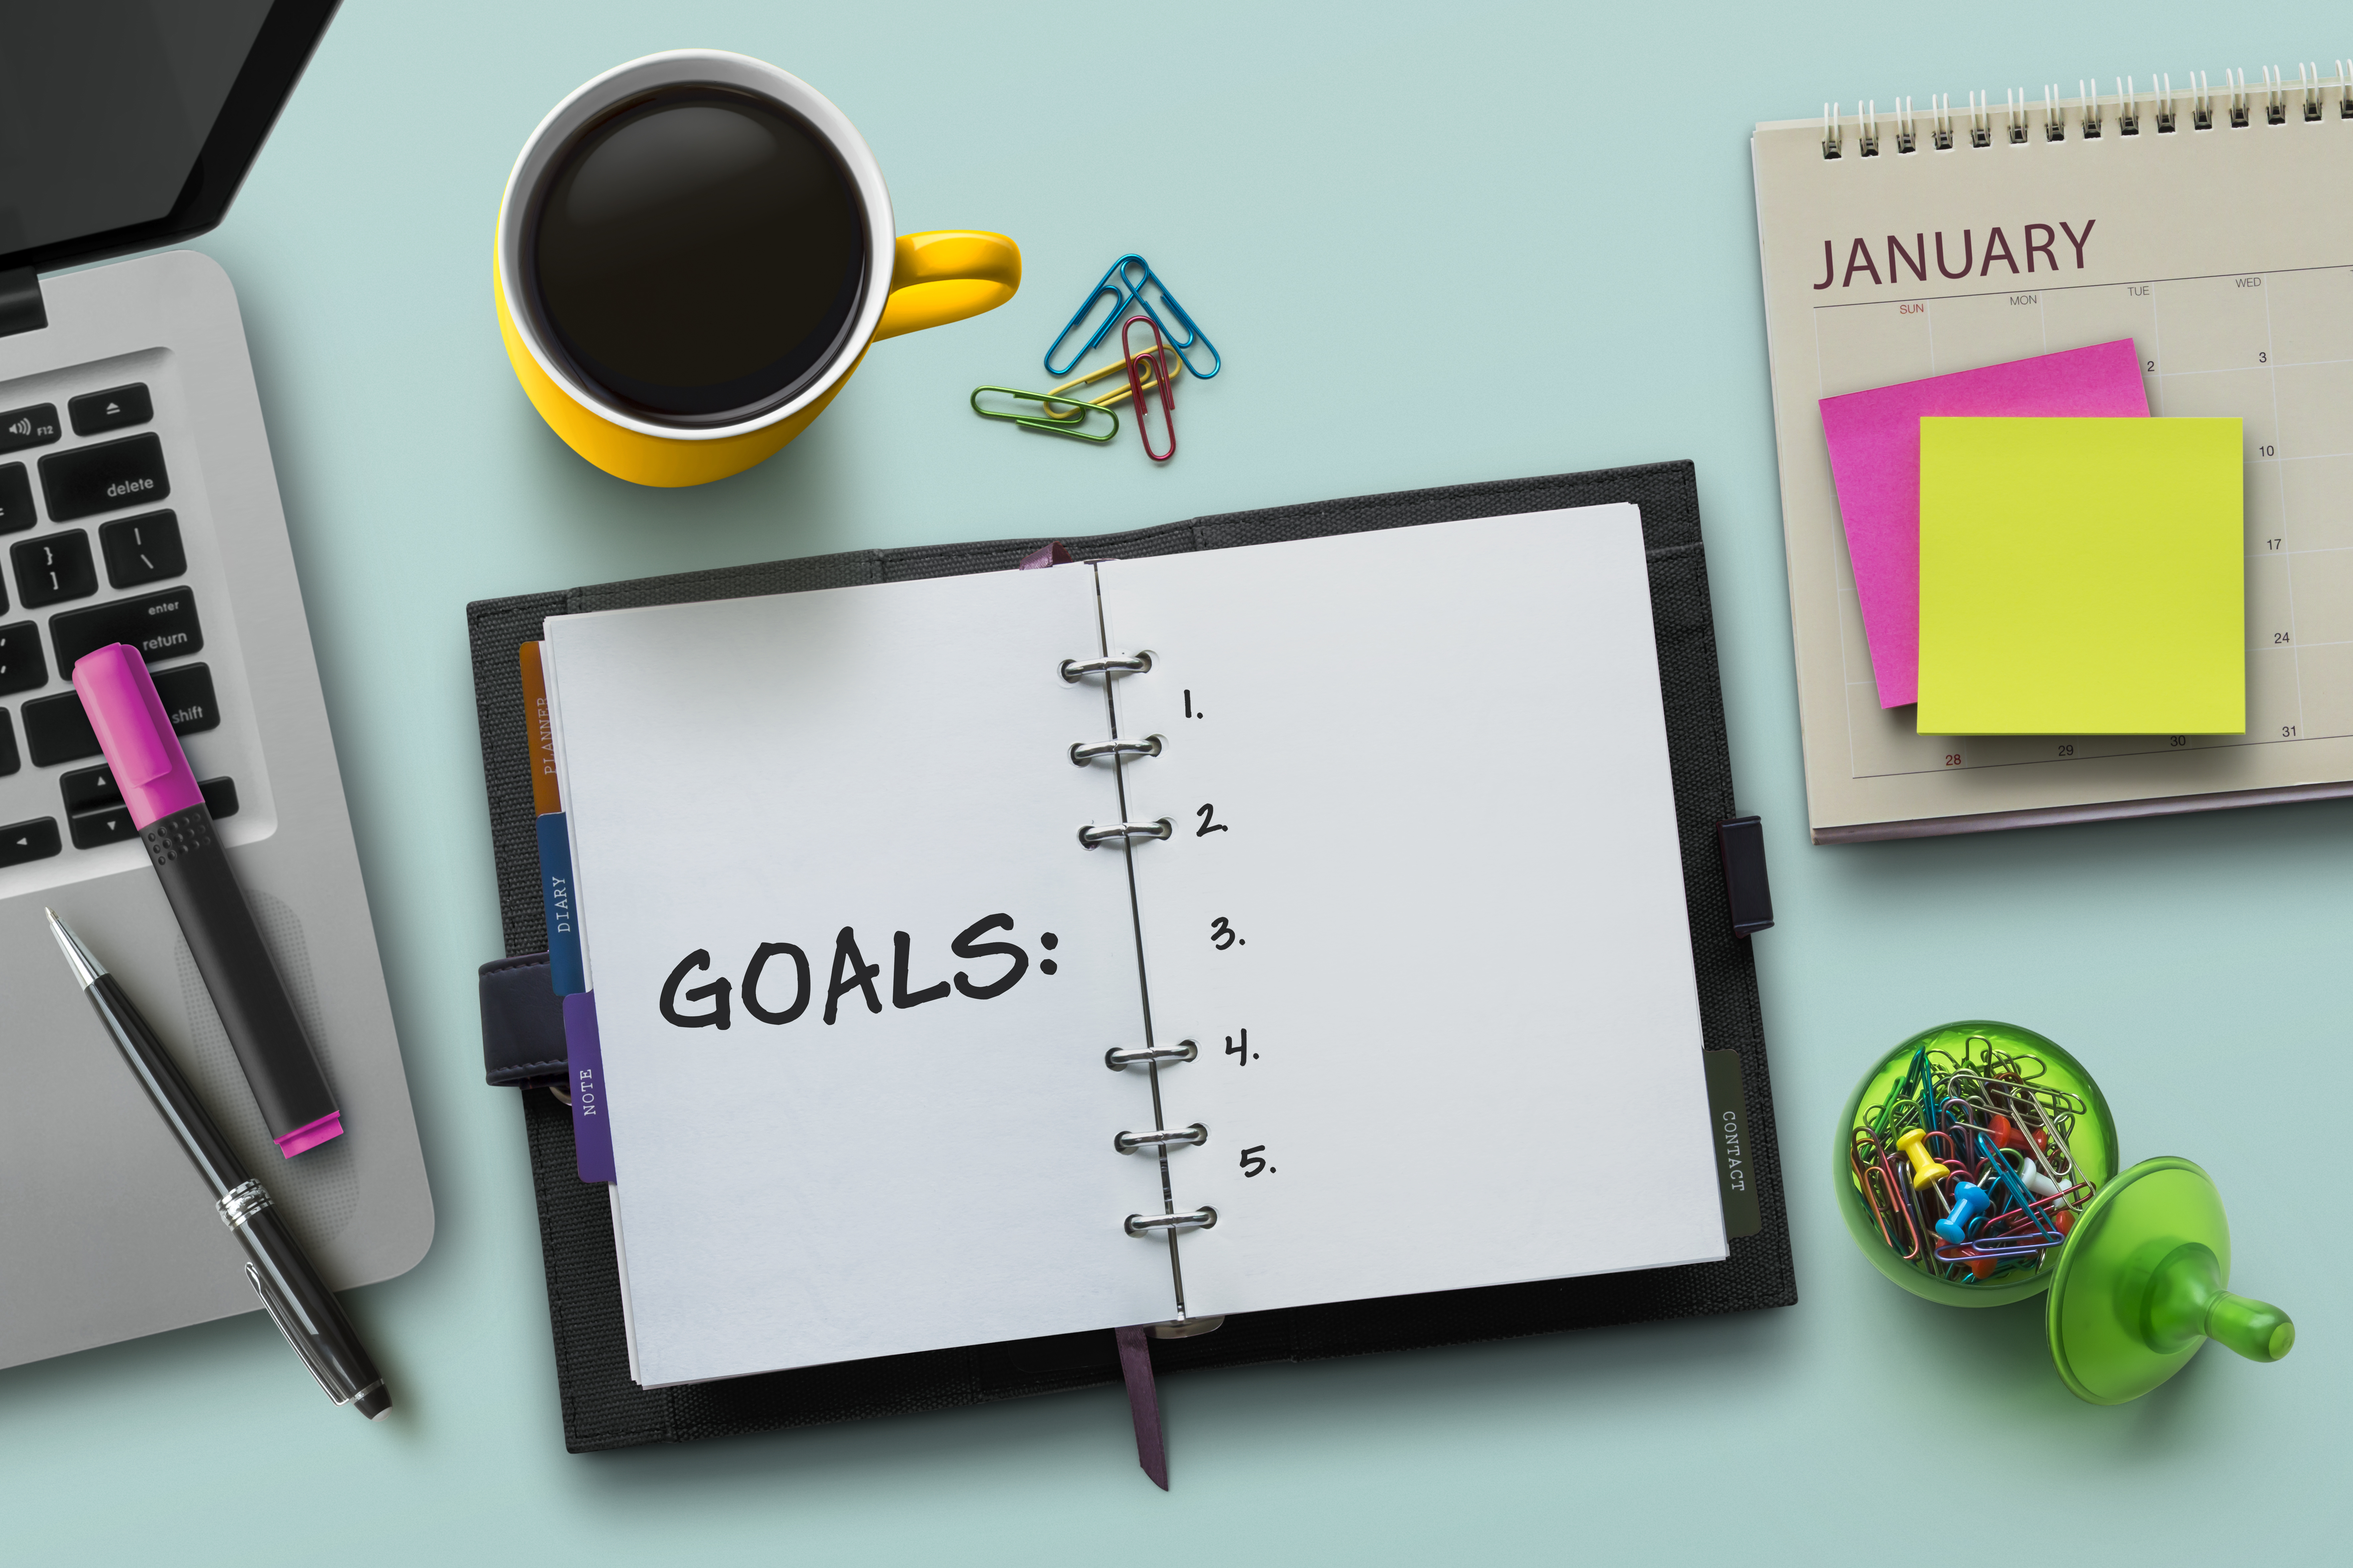 MONEY HACKS: What Are Your Financial Goals for 2021?